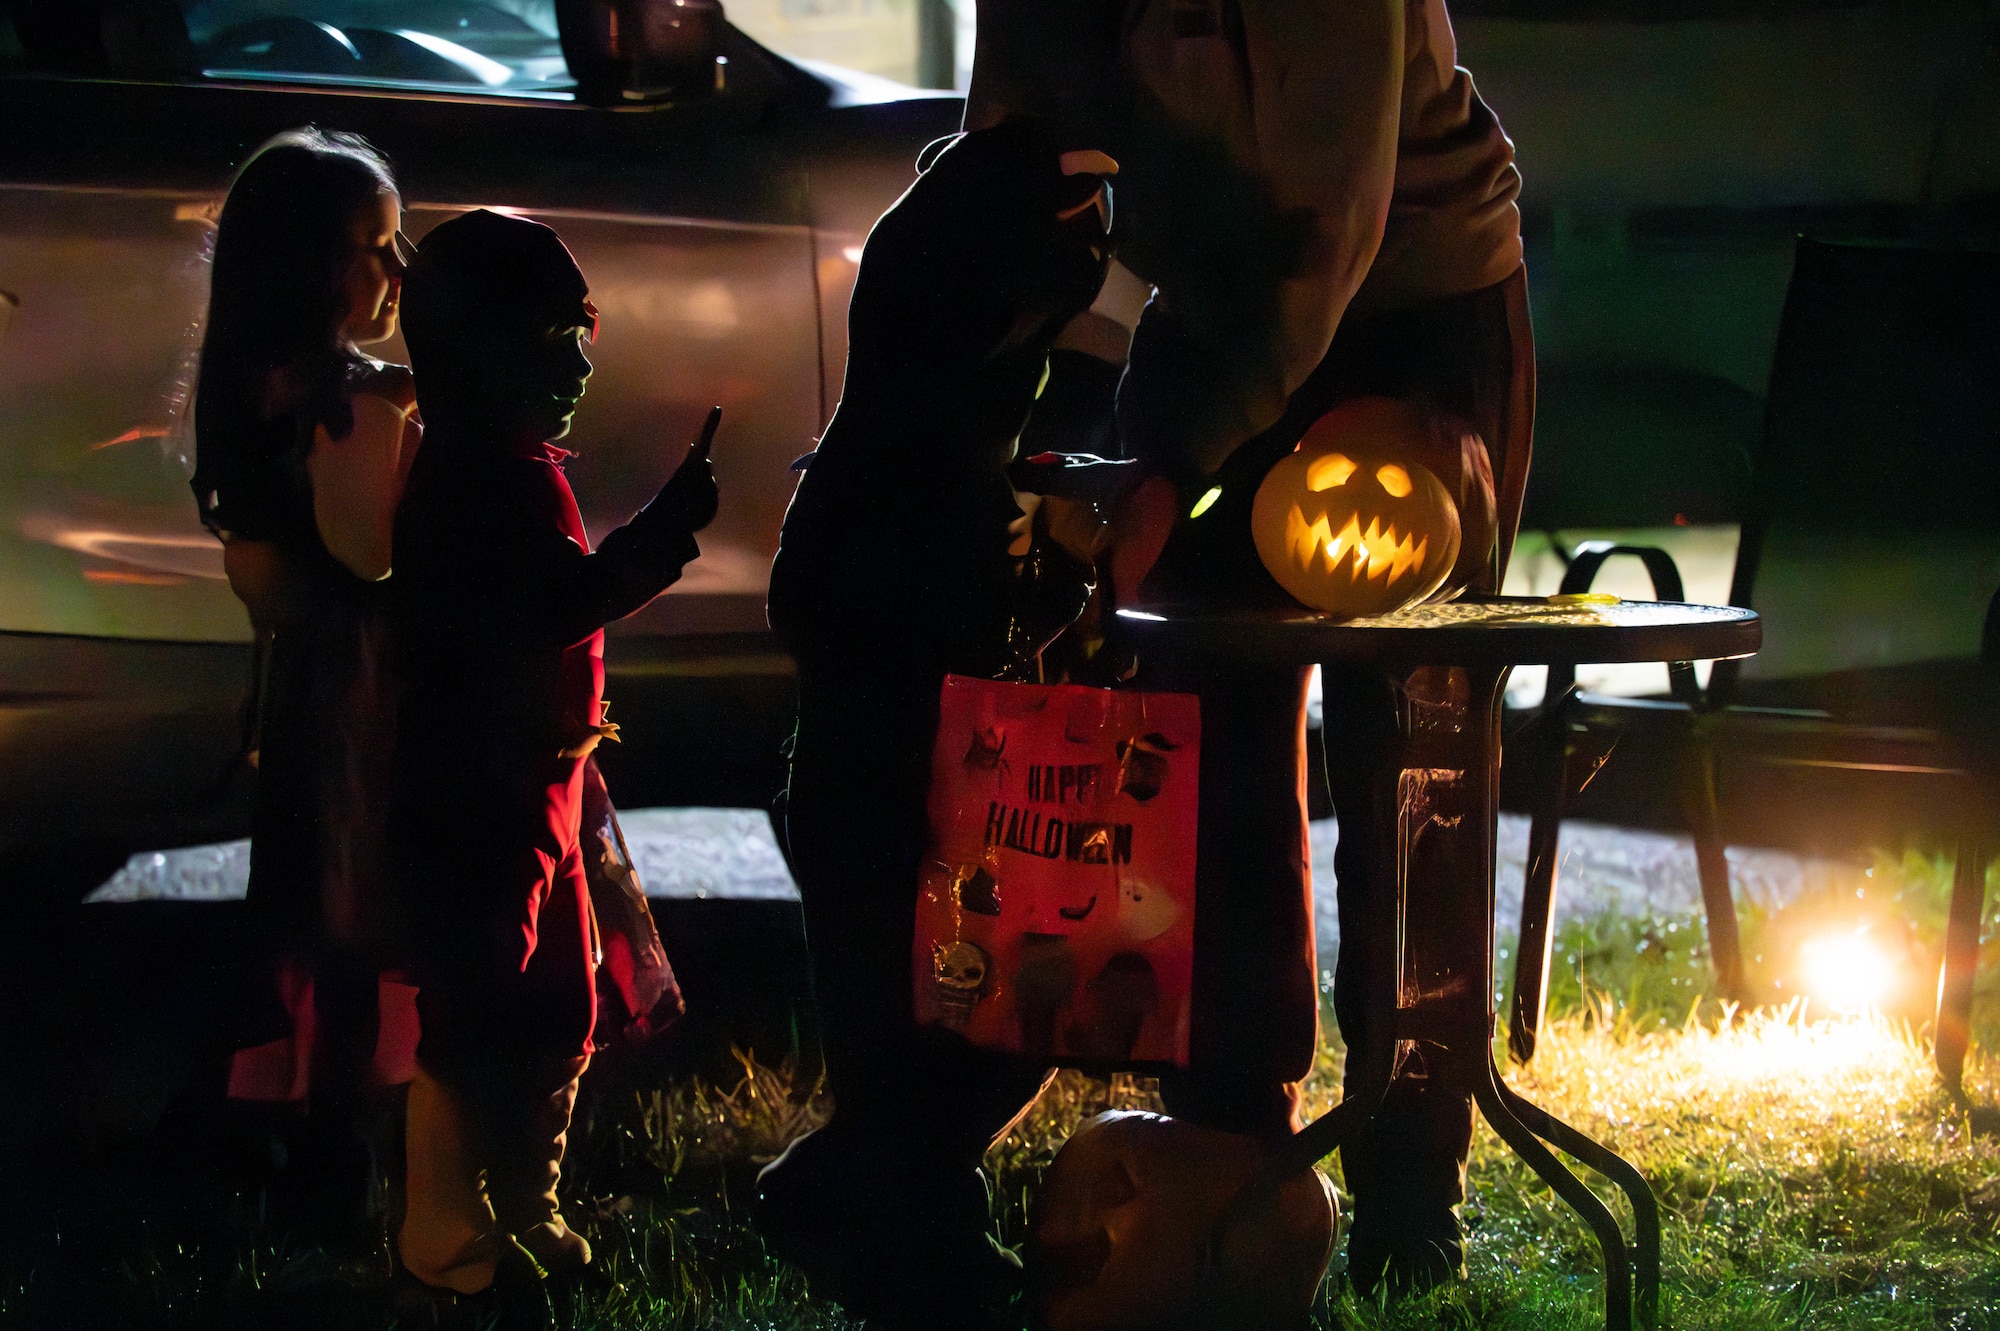 The silhouettes of local children approach a jack-o-lantern